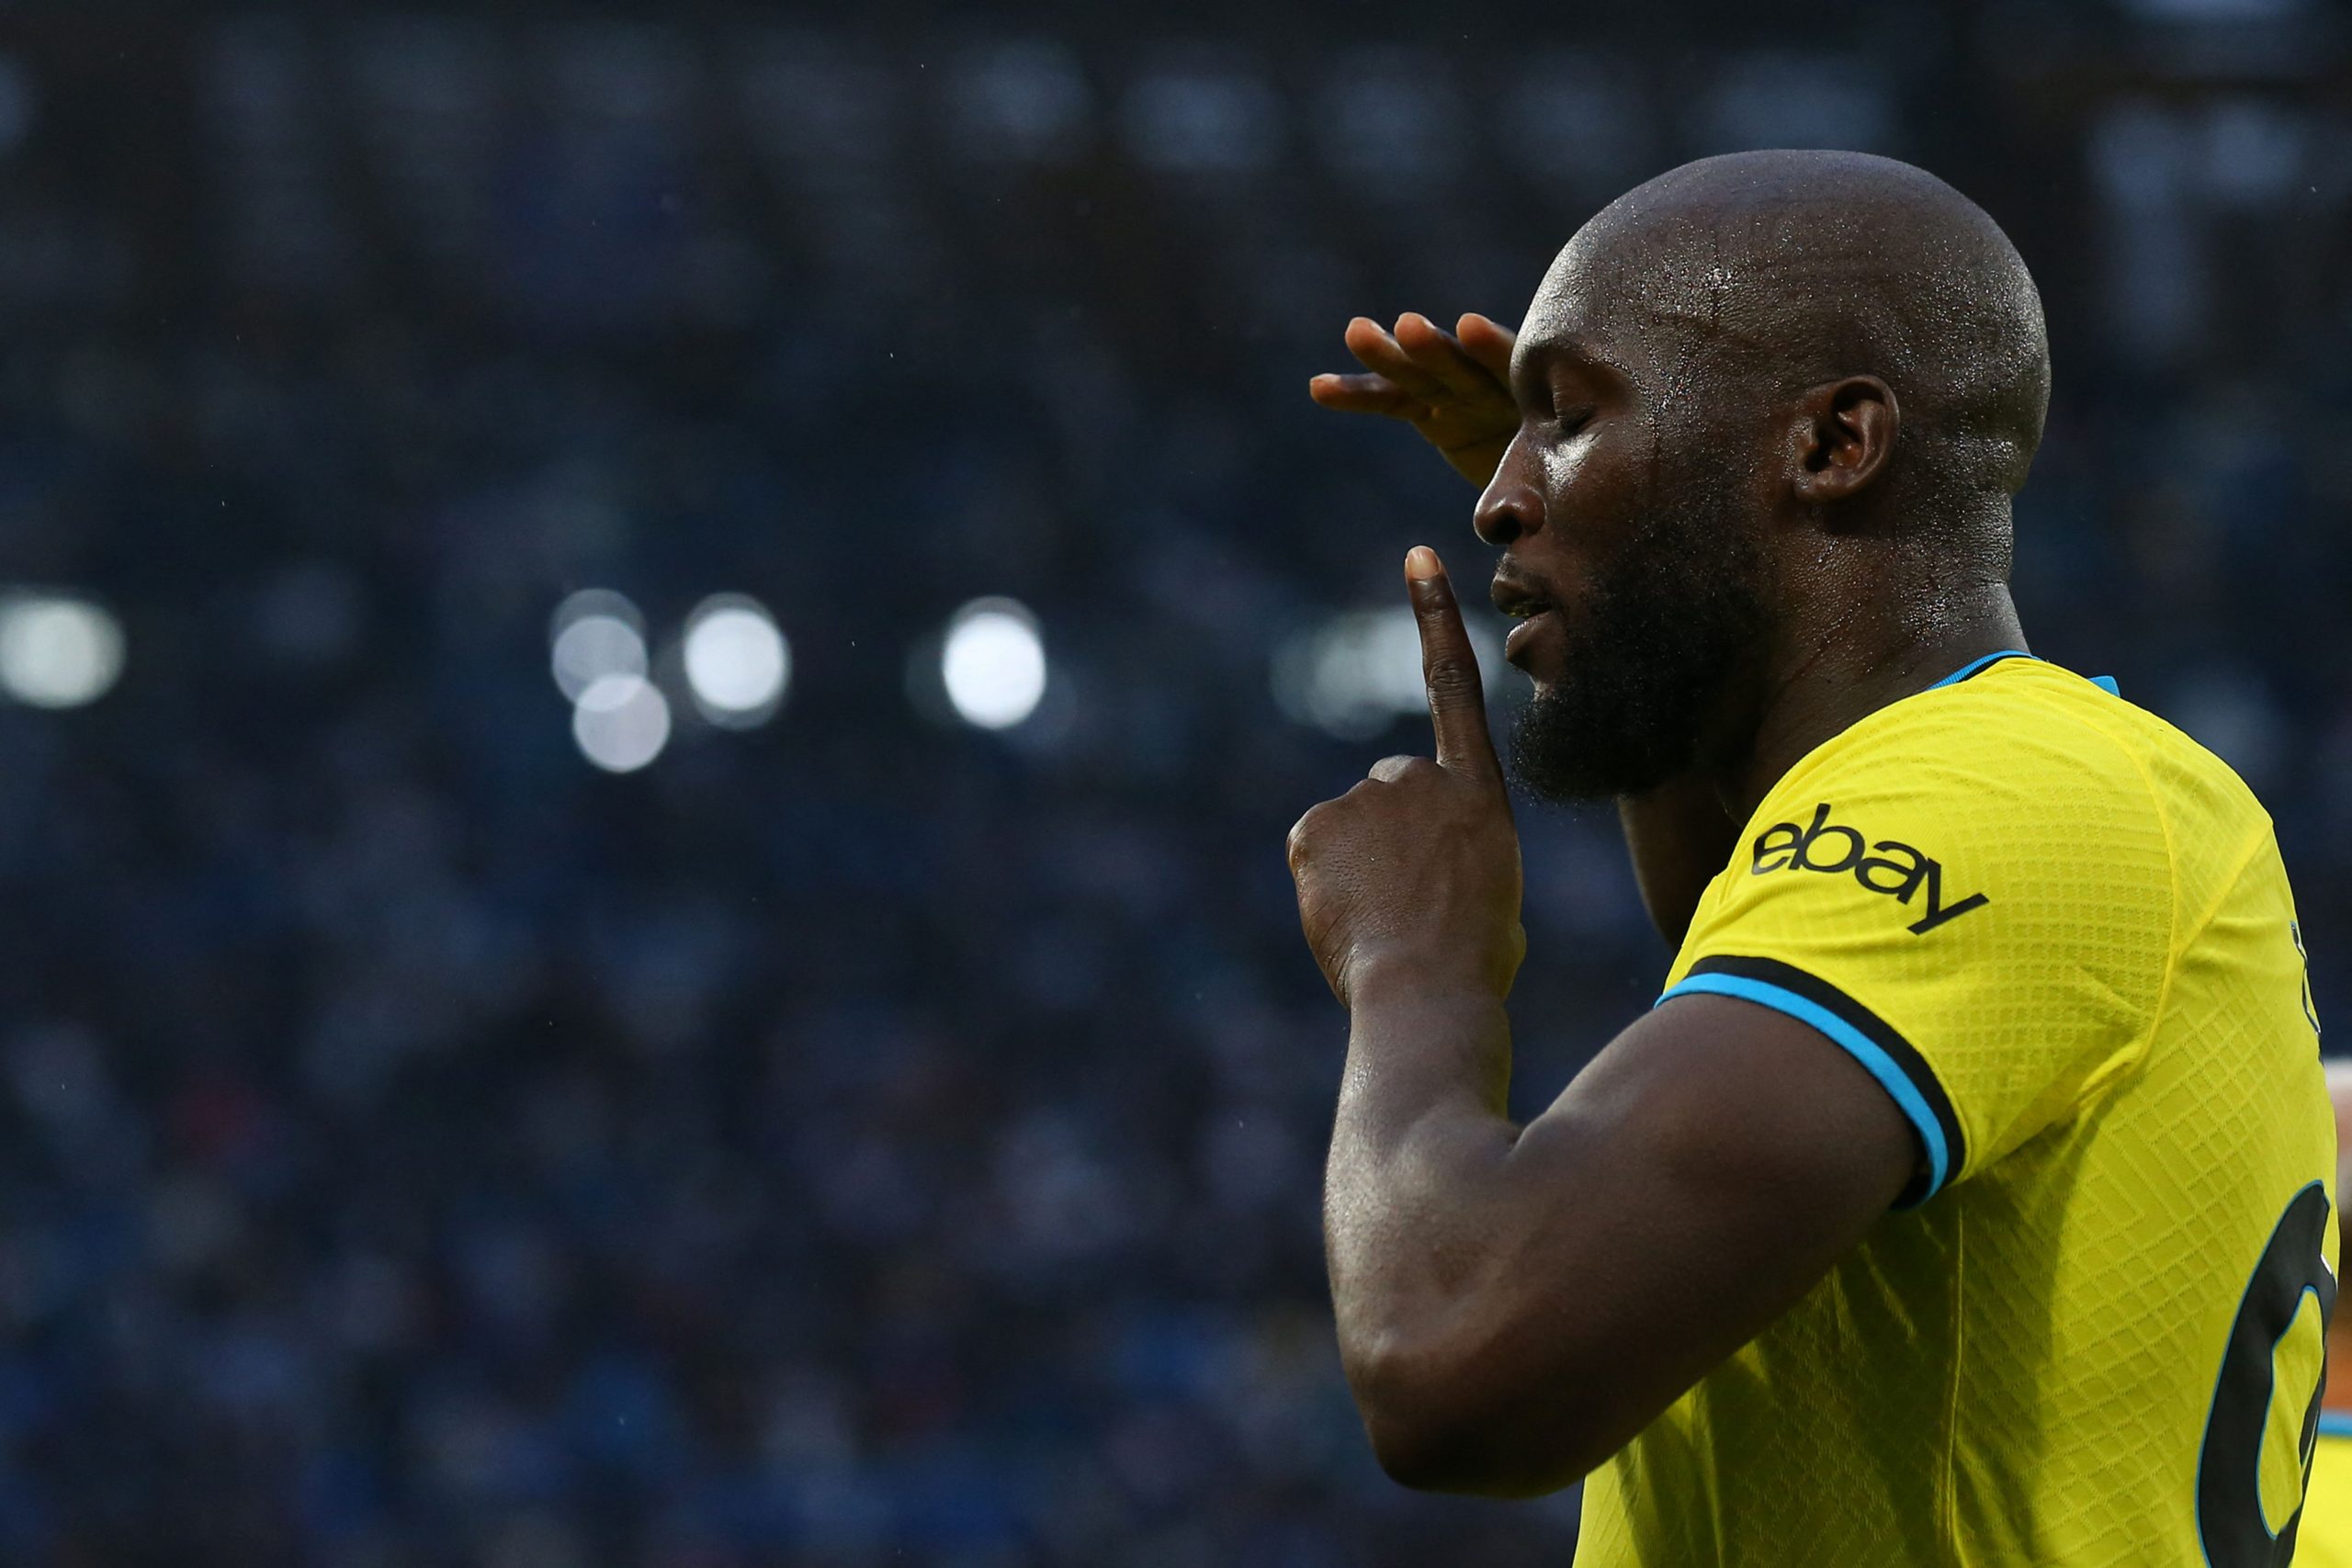 Inter Milan's Belgian forward Romelu Lukaku celebrates after scoring an equalizer during the Italian Serie A football match between Napoli and Inter on May 21, 2023 at the Diego-Maradona stadium in Naples. (Photo by CARLO HERMANN / AFP) (Photo by CARLO HERMANN/AFP via Getty Images)